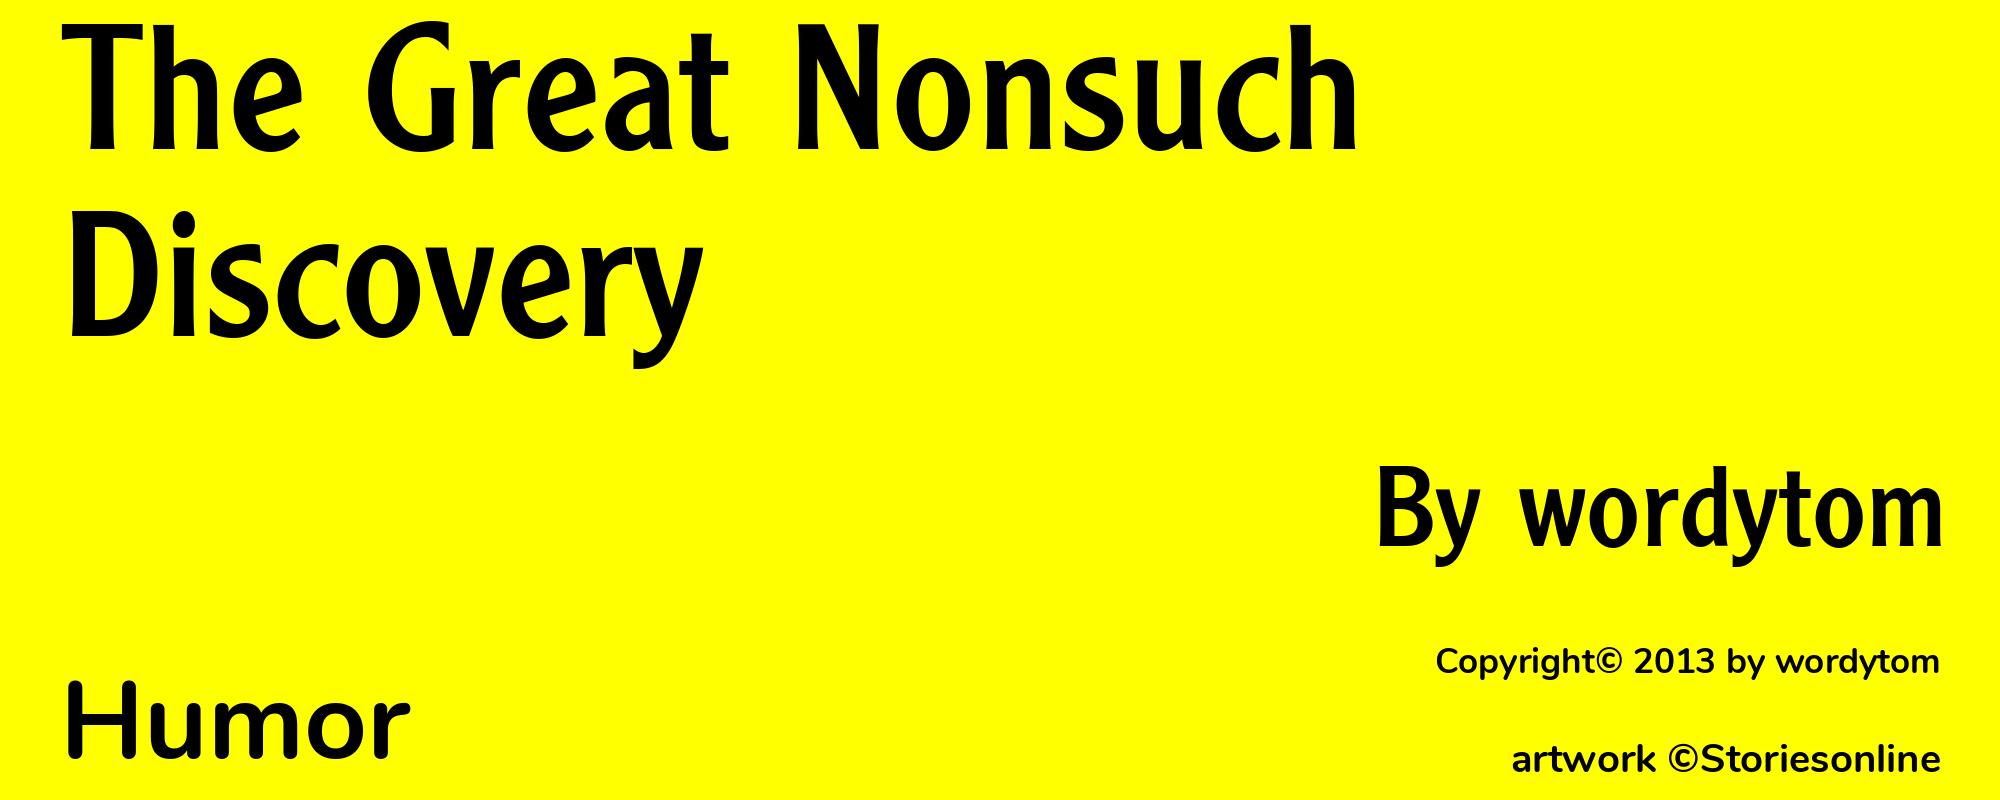 The Great Nonsuch Discovery - Cover